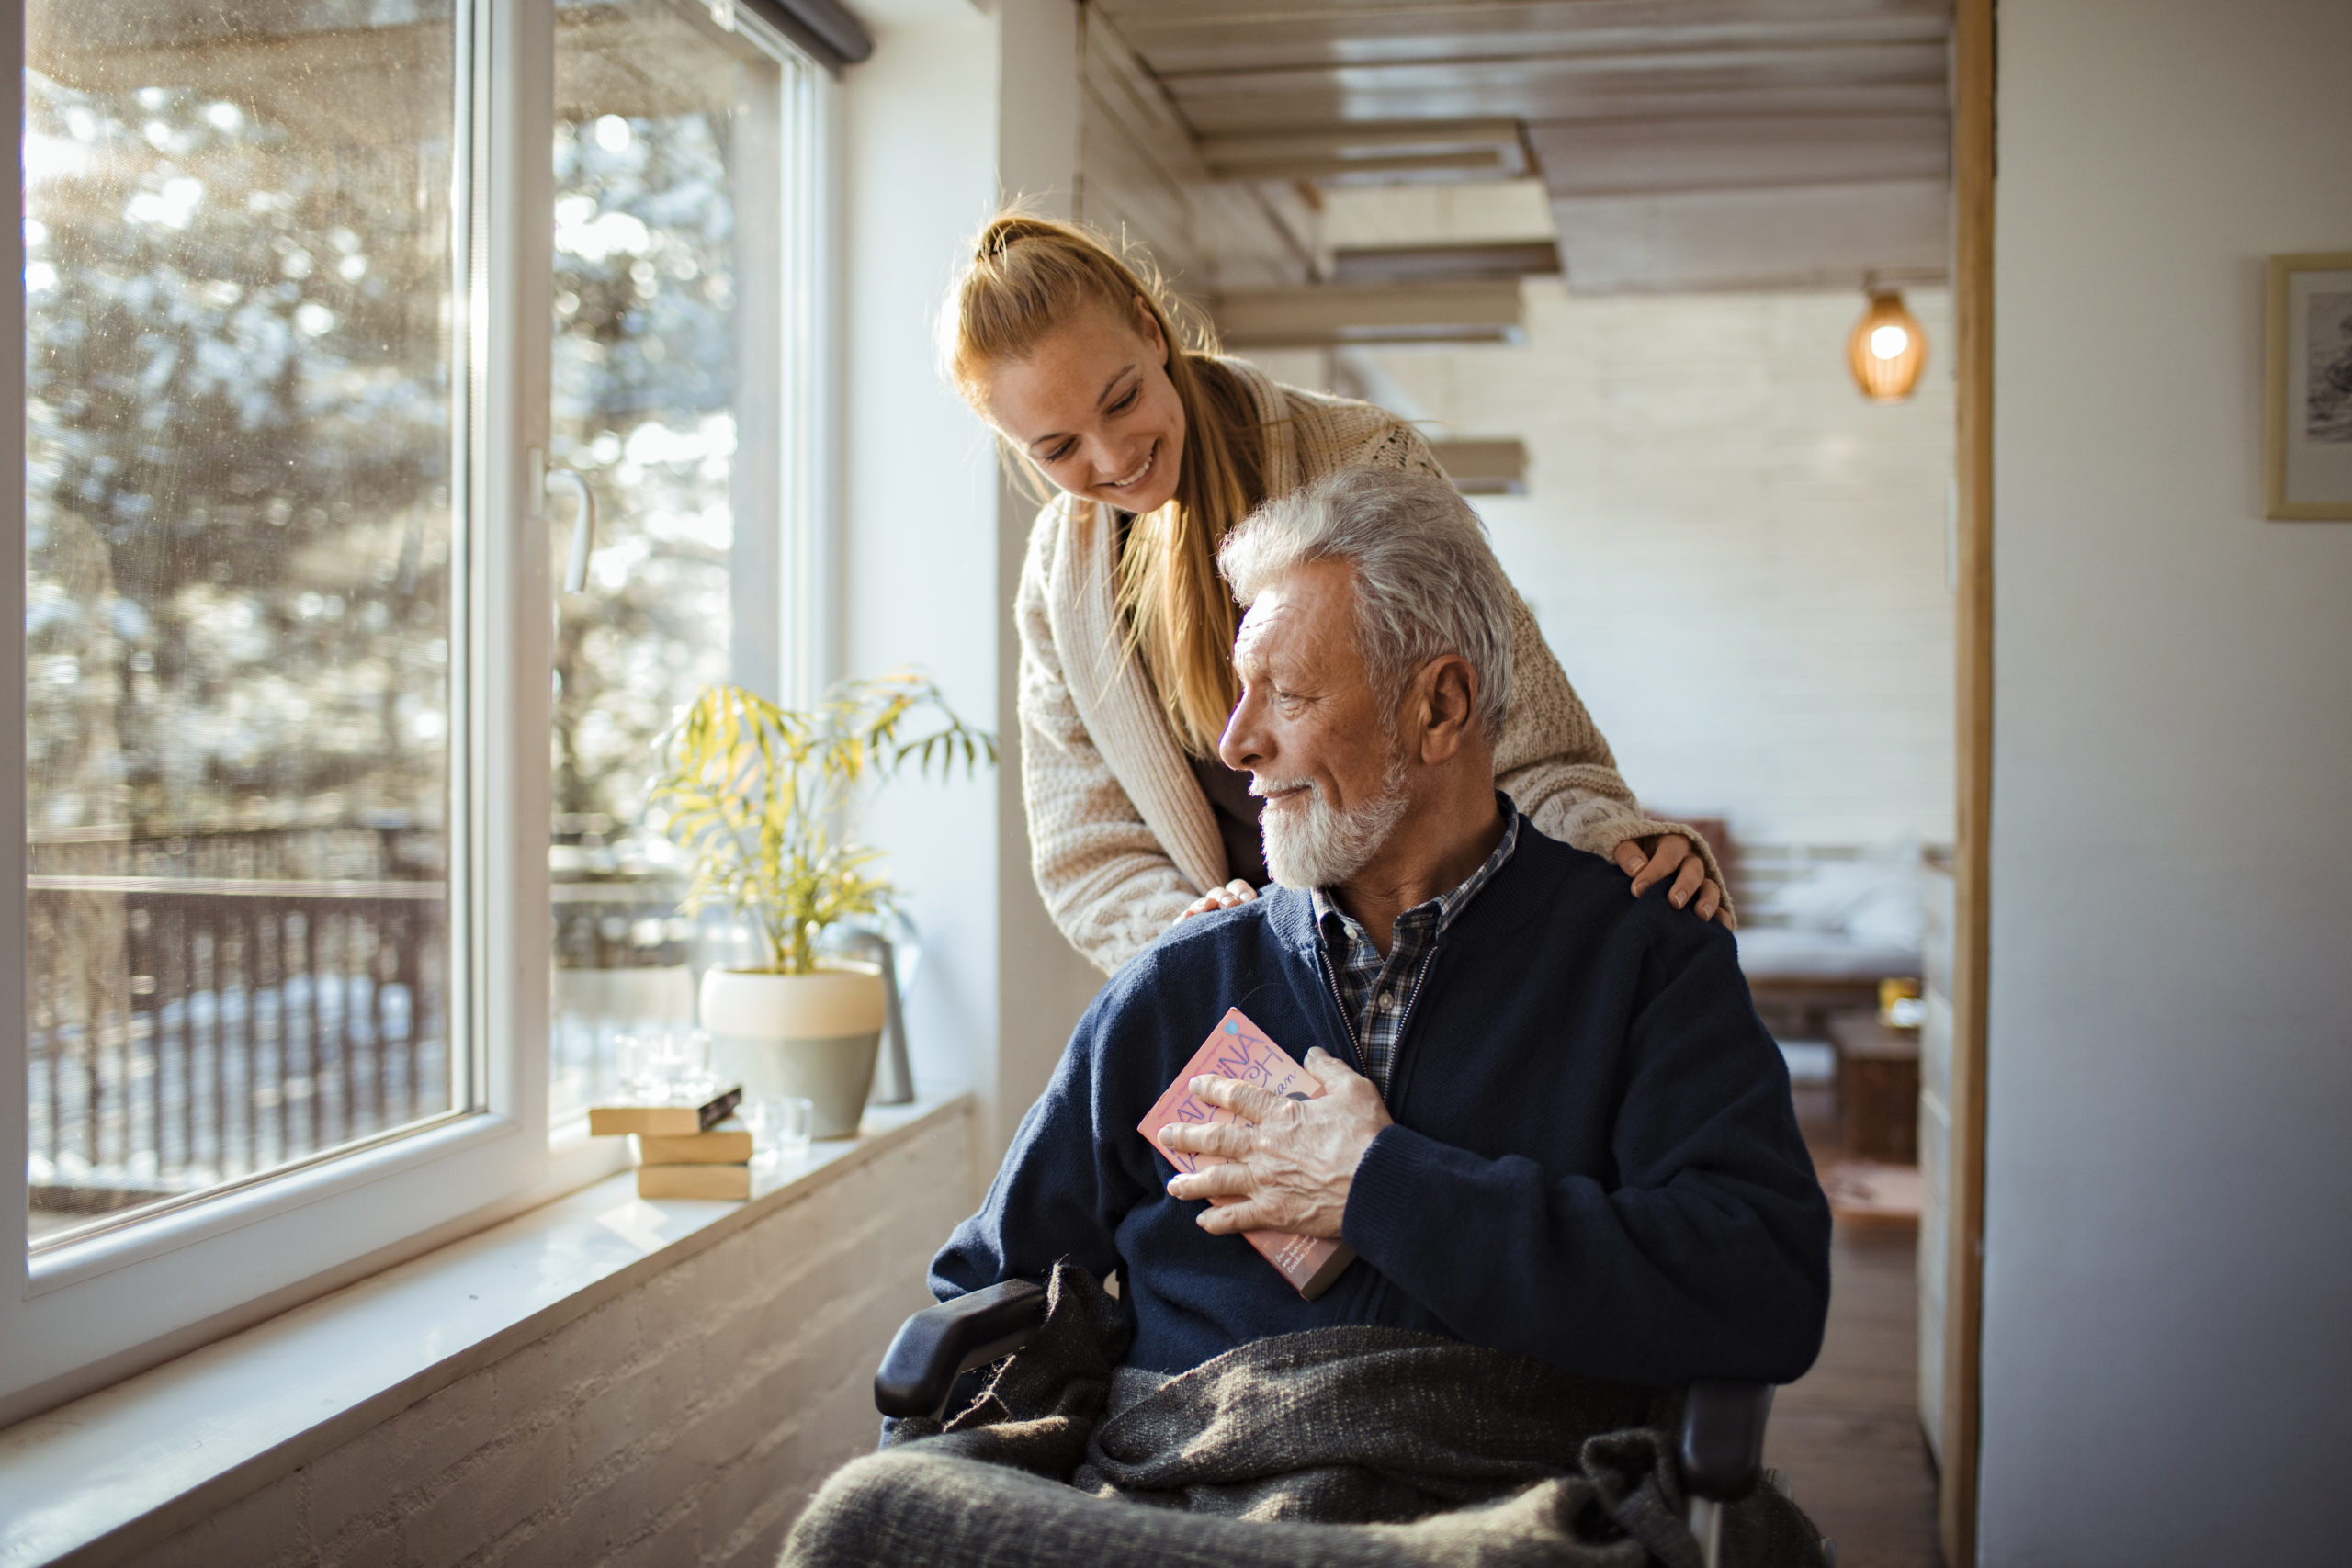 What Is Quality Of Life For A Senior Loved One?